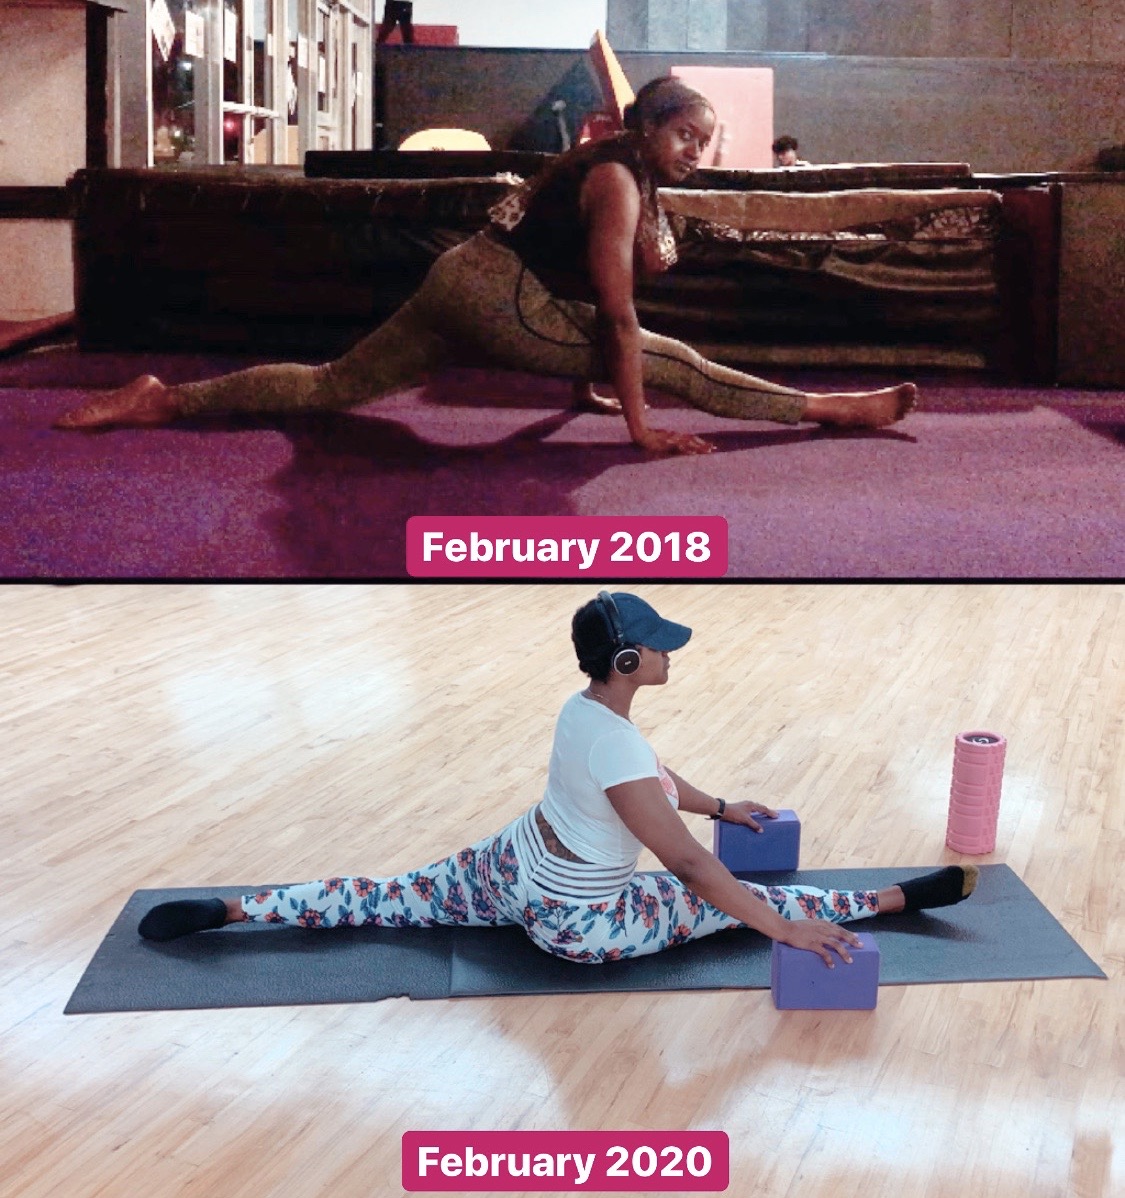 Hyperbolic Stretching delivers consistent results in the shortest amount of time. After years of wishing to be able to do the splits, I was finally in them, thanks to Hyperbolic Stretching!